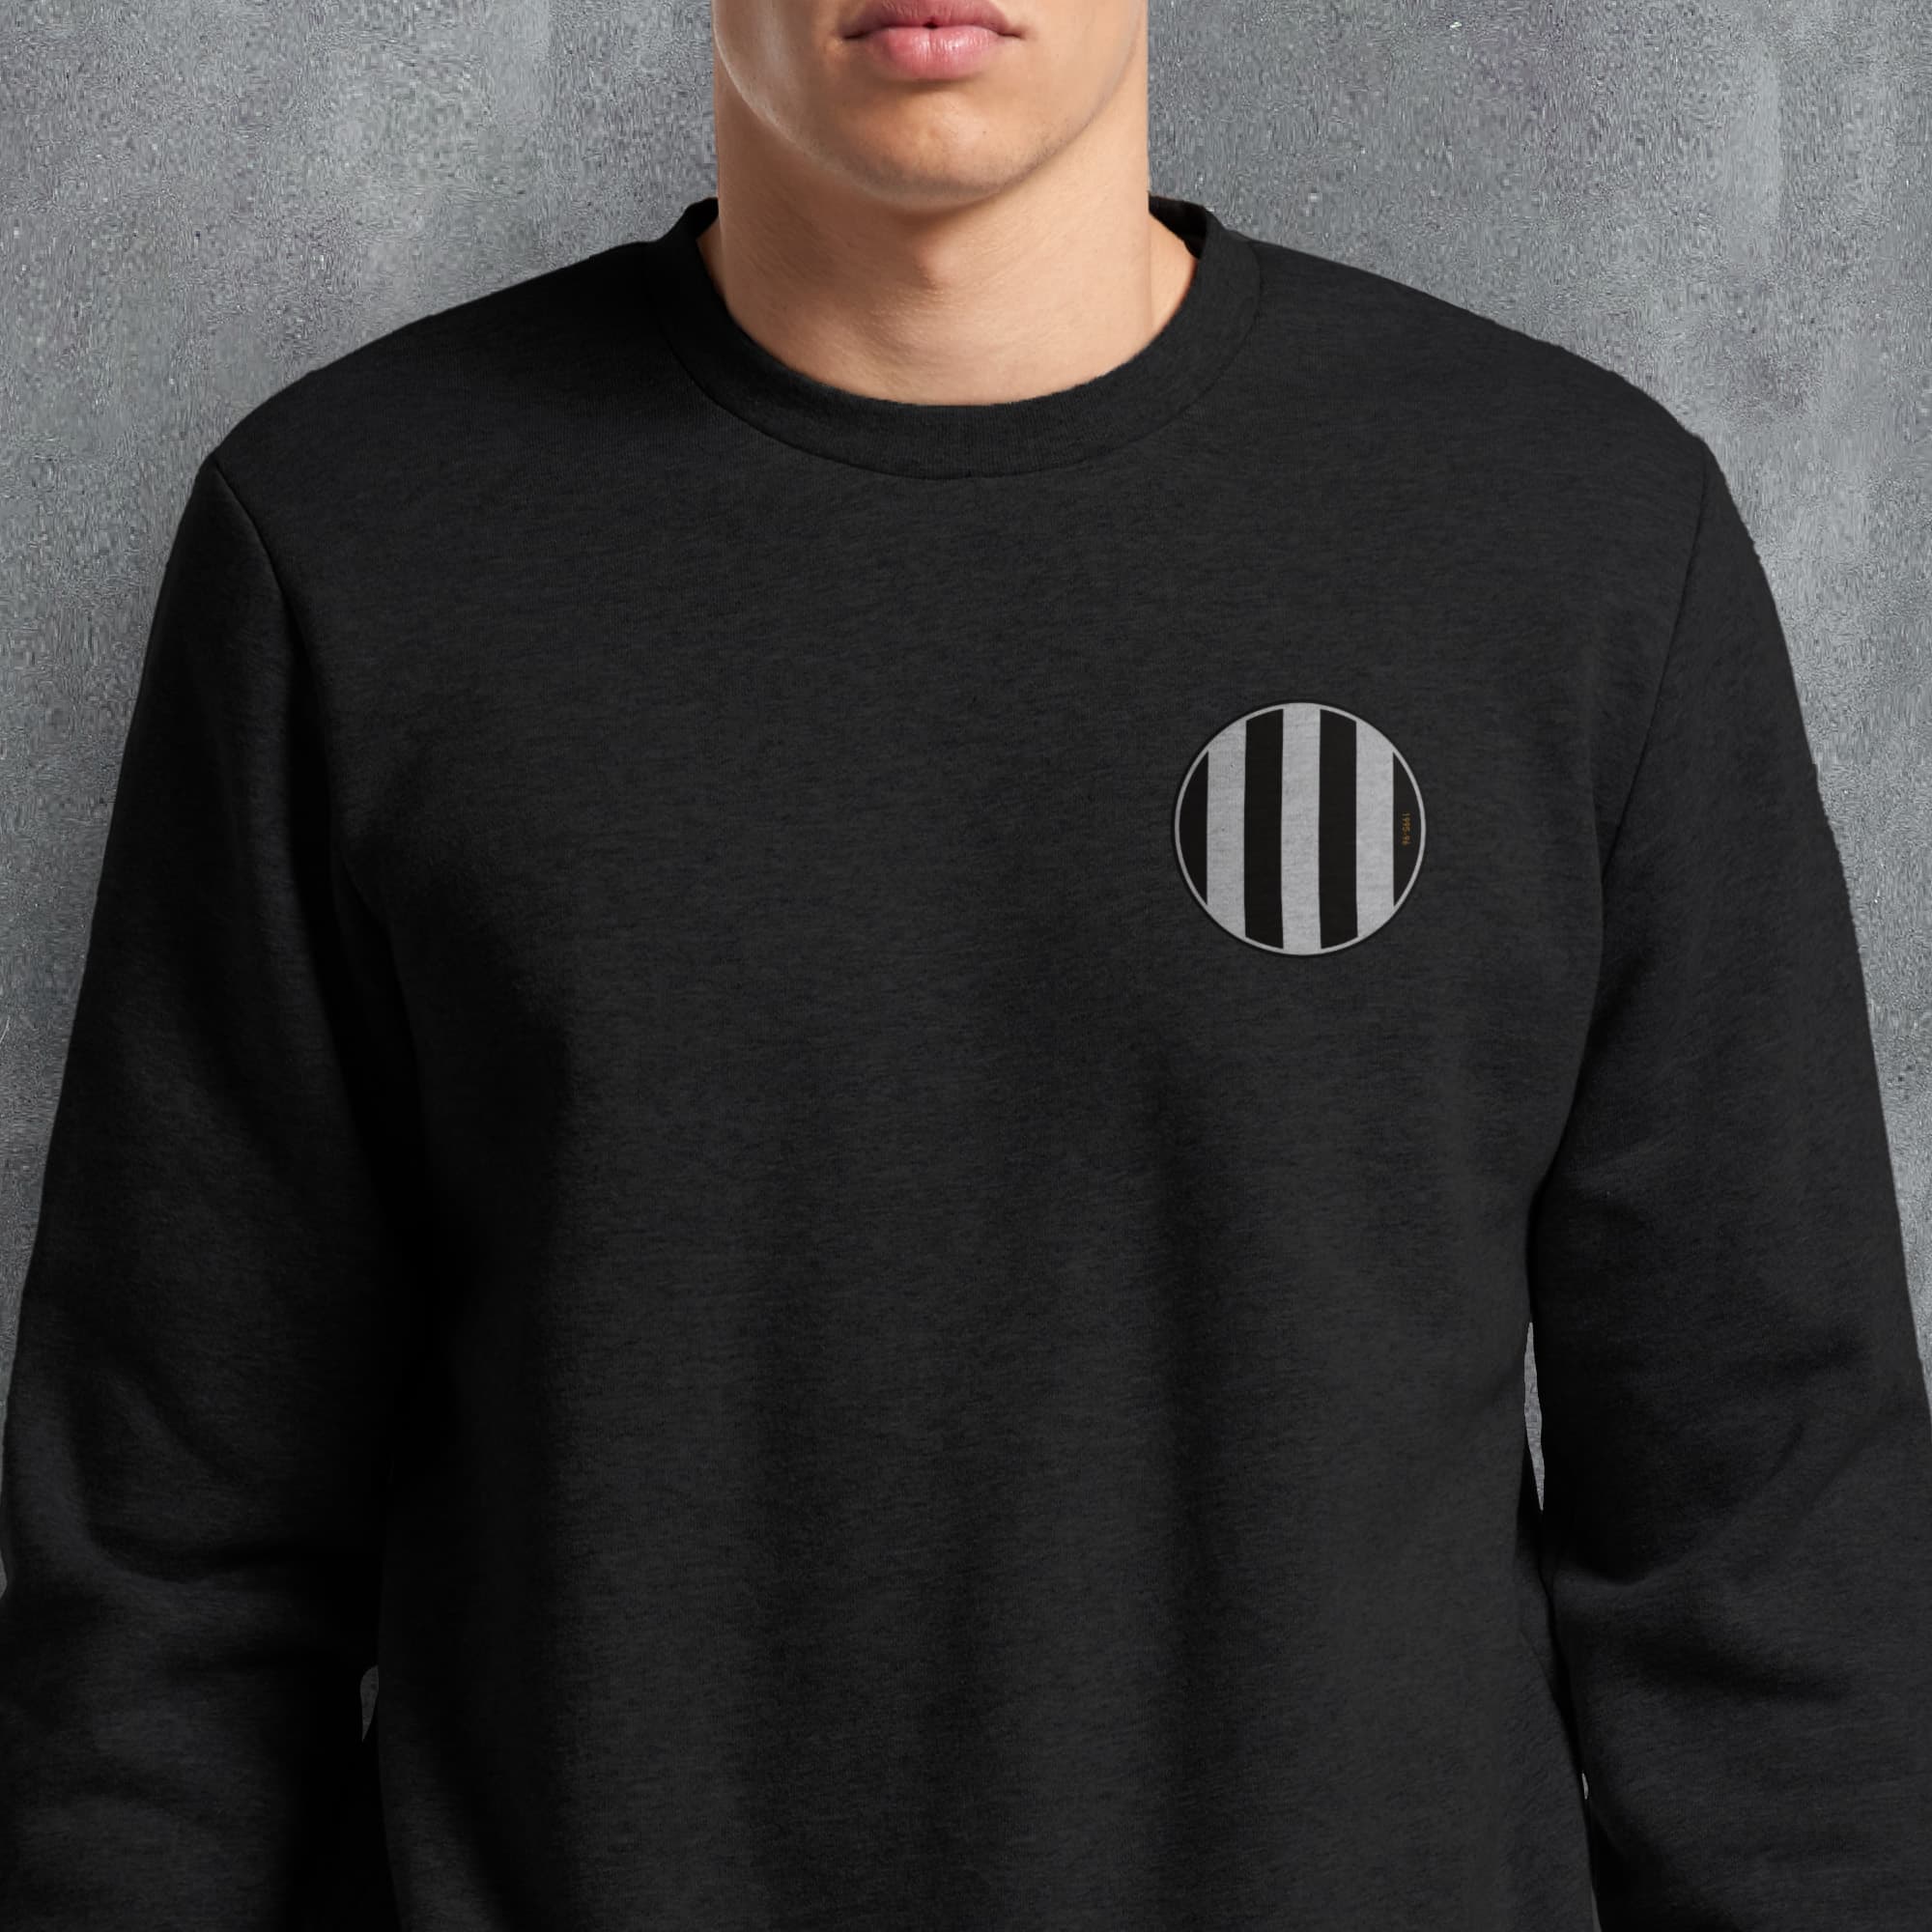 a man wearing a black sweatshirt with a black and white circle on it